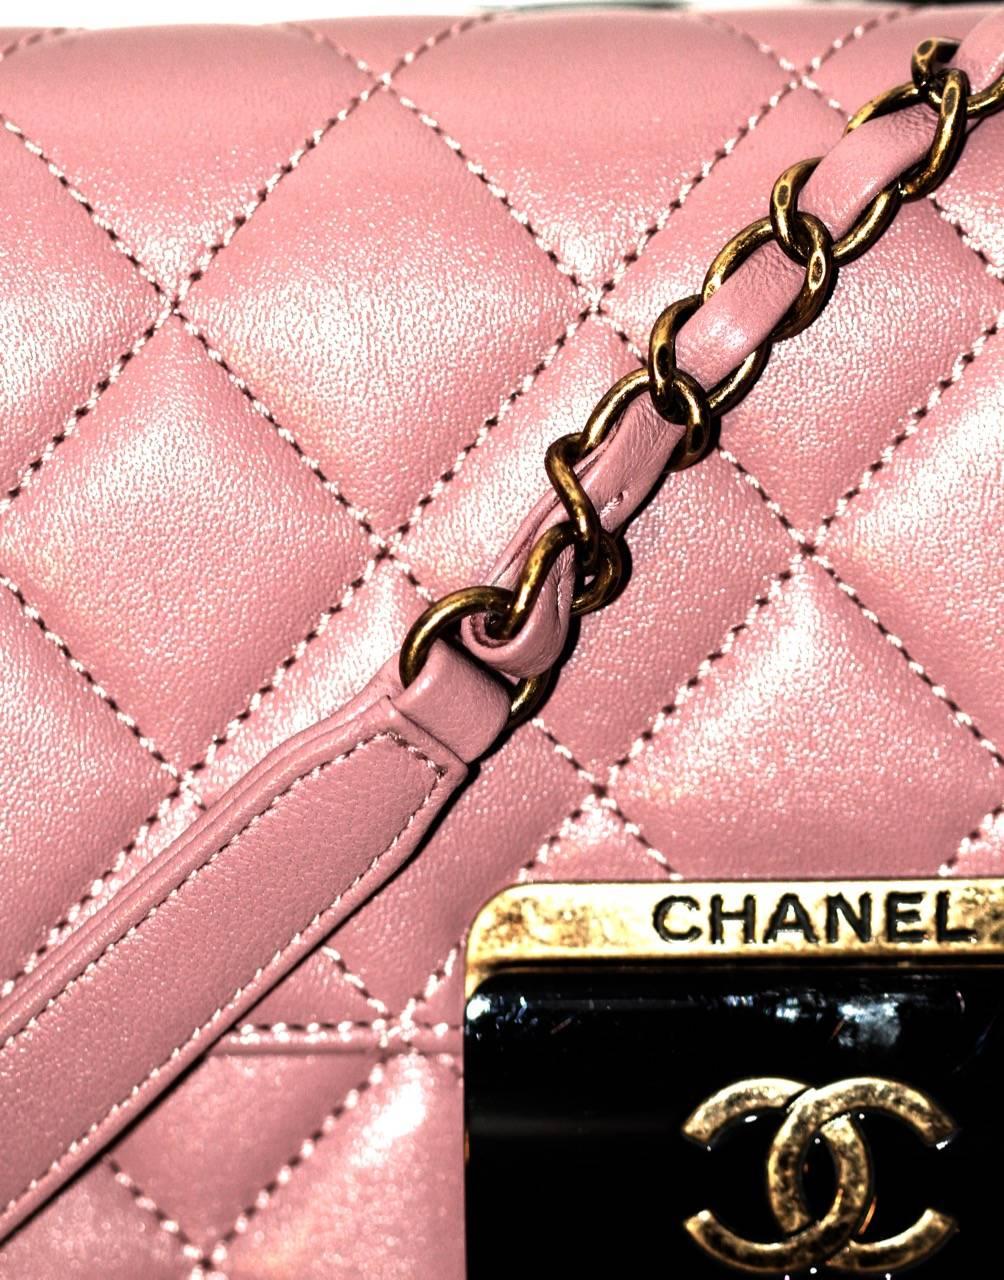 CHANEL Beauty Lock Collection Old Pink Sheepskin Leather Flap Bag  4